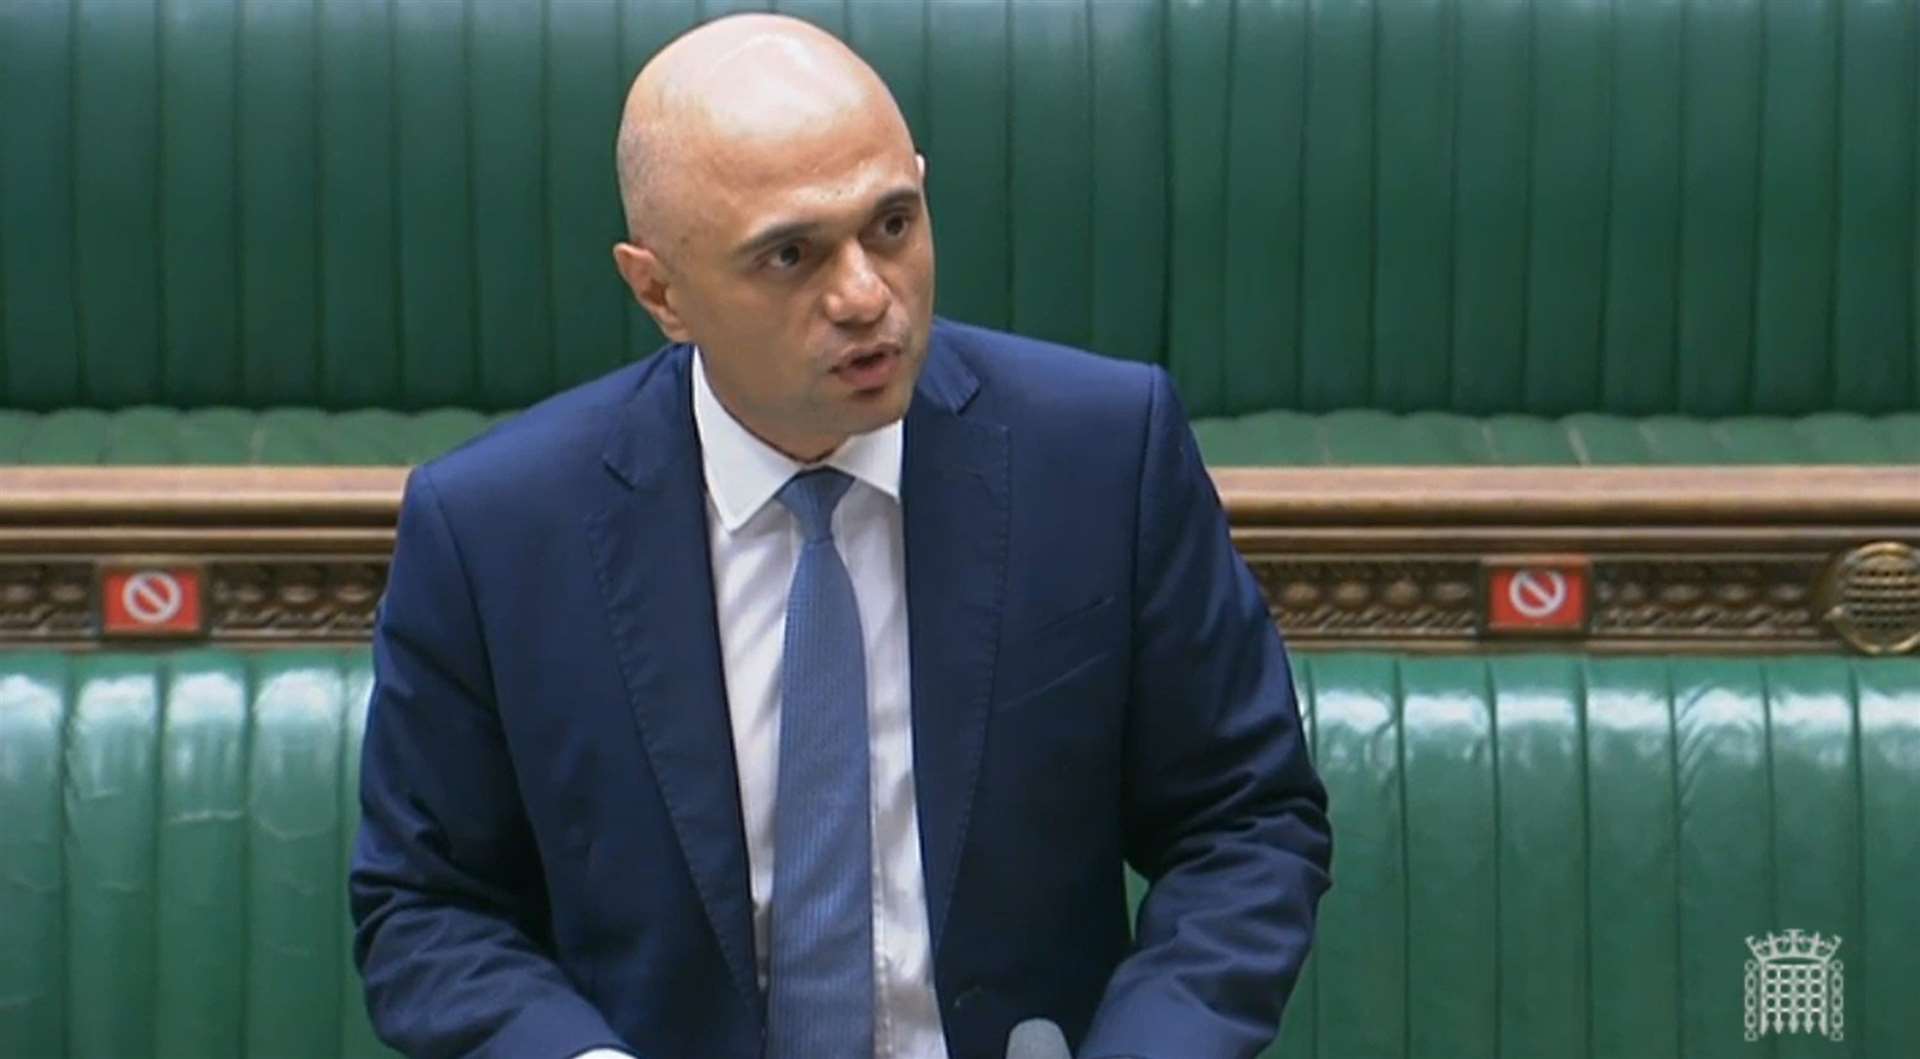 Health secretary Sajid Javid says there are compelling reasons to ease lockdown measures